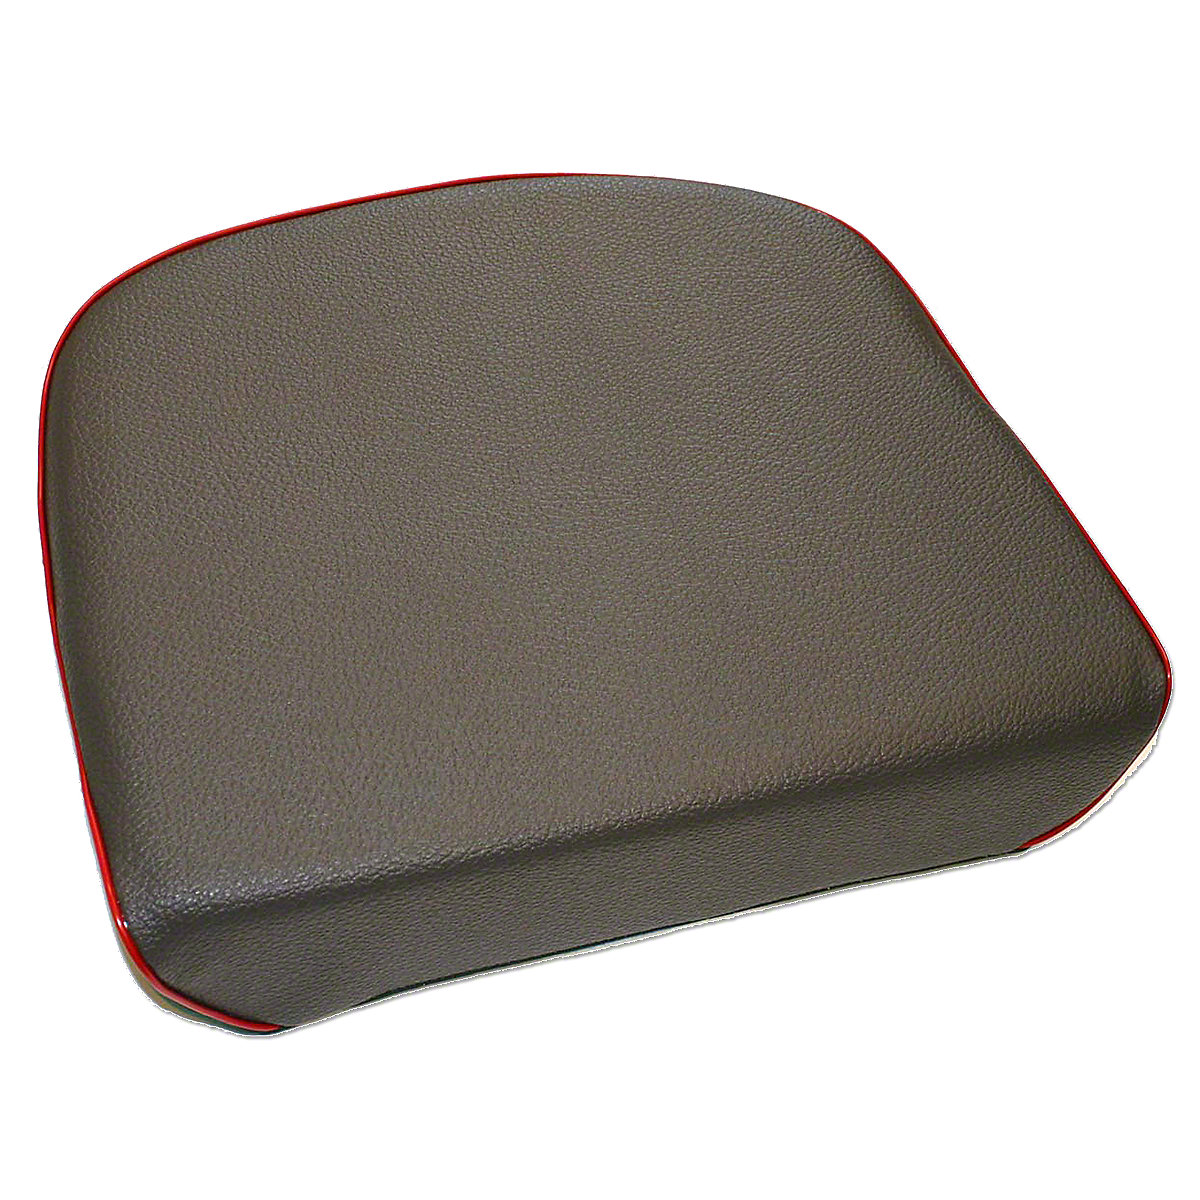 Bottom Seat Cover For Massey Ferguson: TO20, TO30, TO35, 40, 35, 50, 135, 150, 230, 235, 240, 245, 250, 282, 283, 98, 35, 85, 88, 95, Massey Harris: 333, 444, 555, 50.